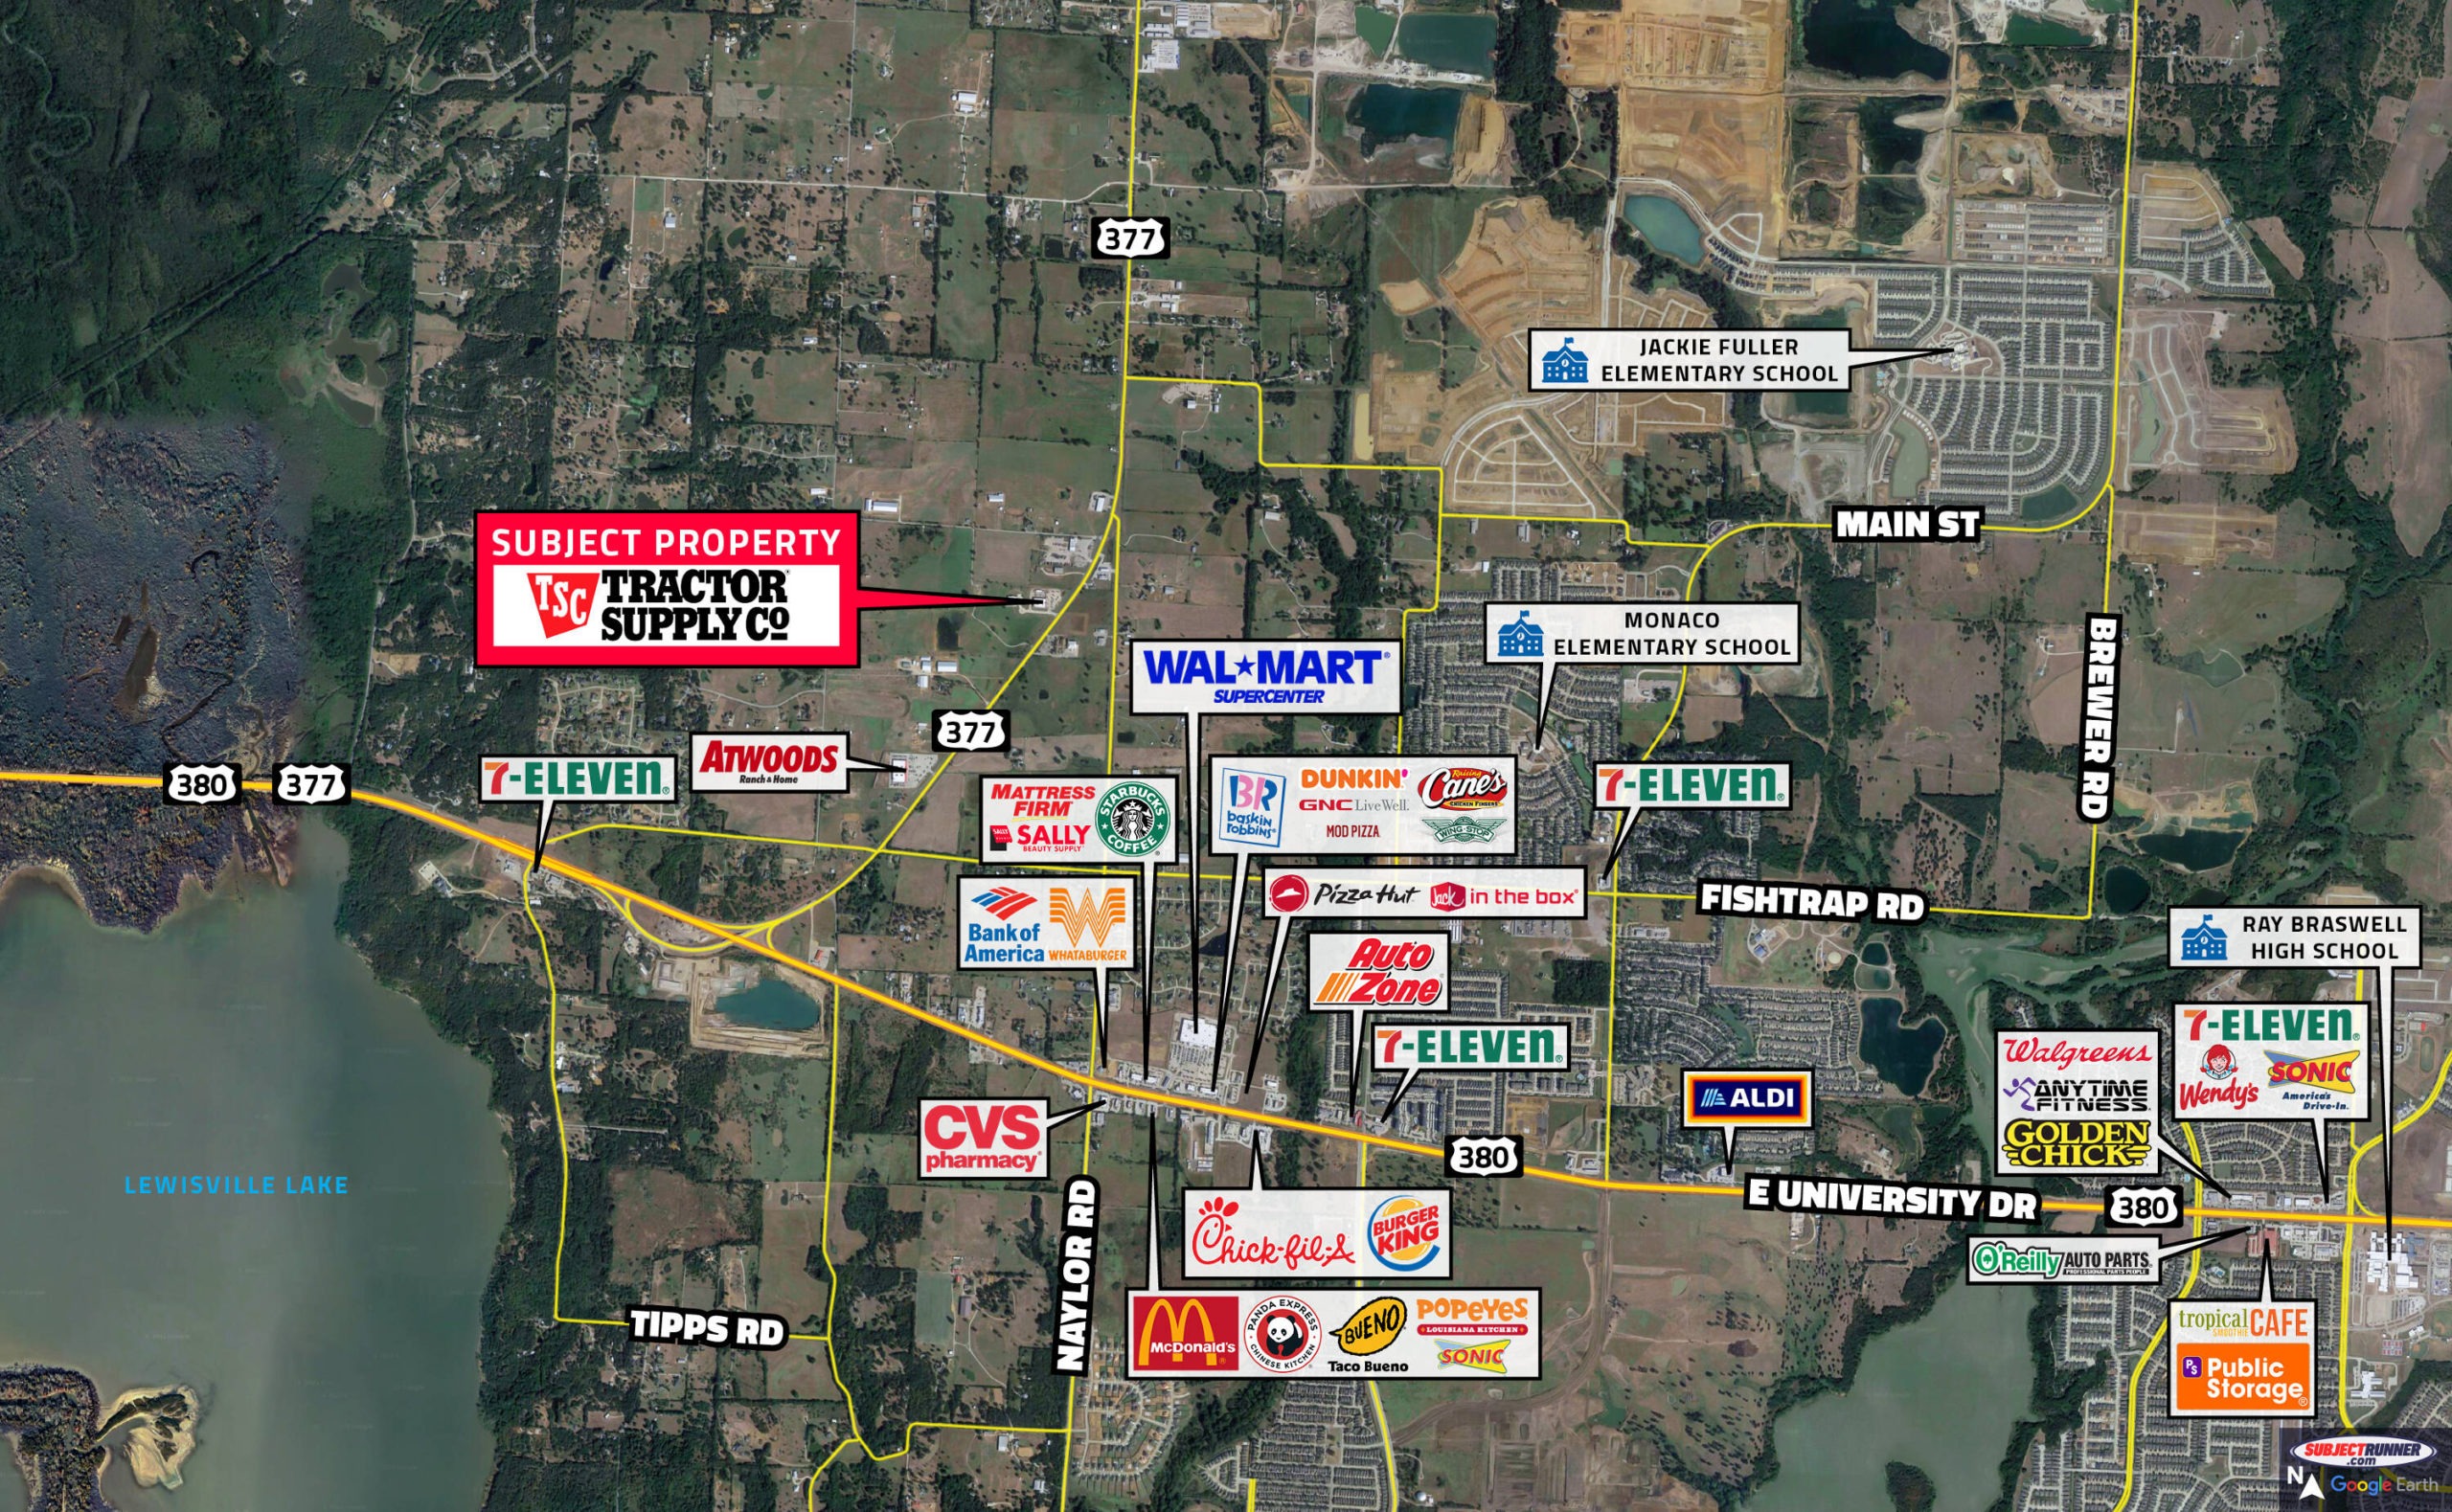 Tractor Supply | Affluent Dallas suburb | High growth area